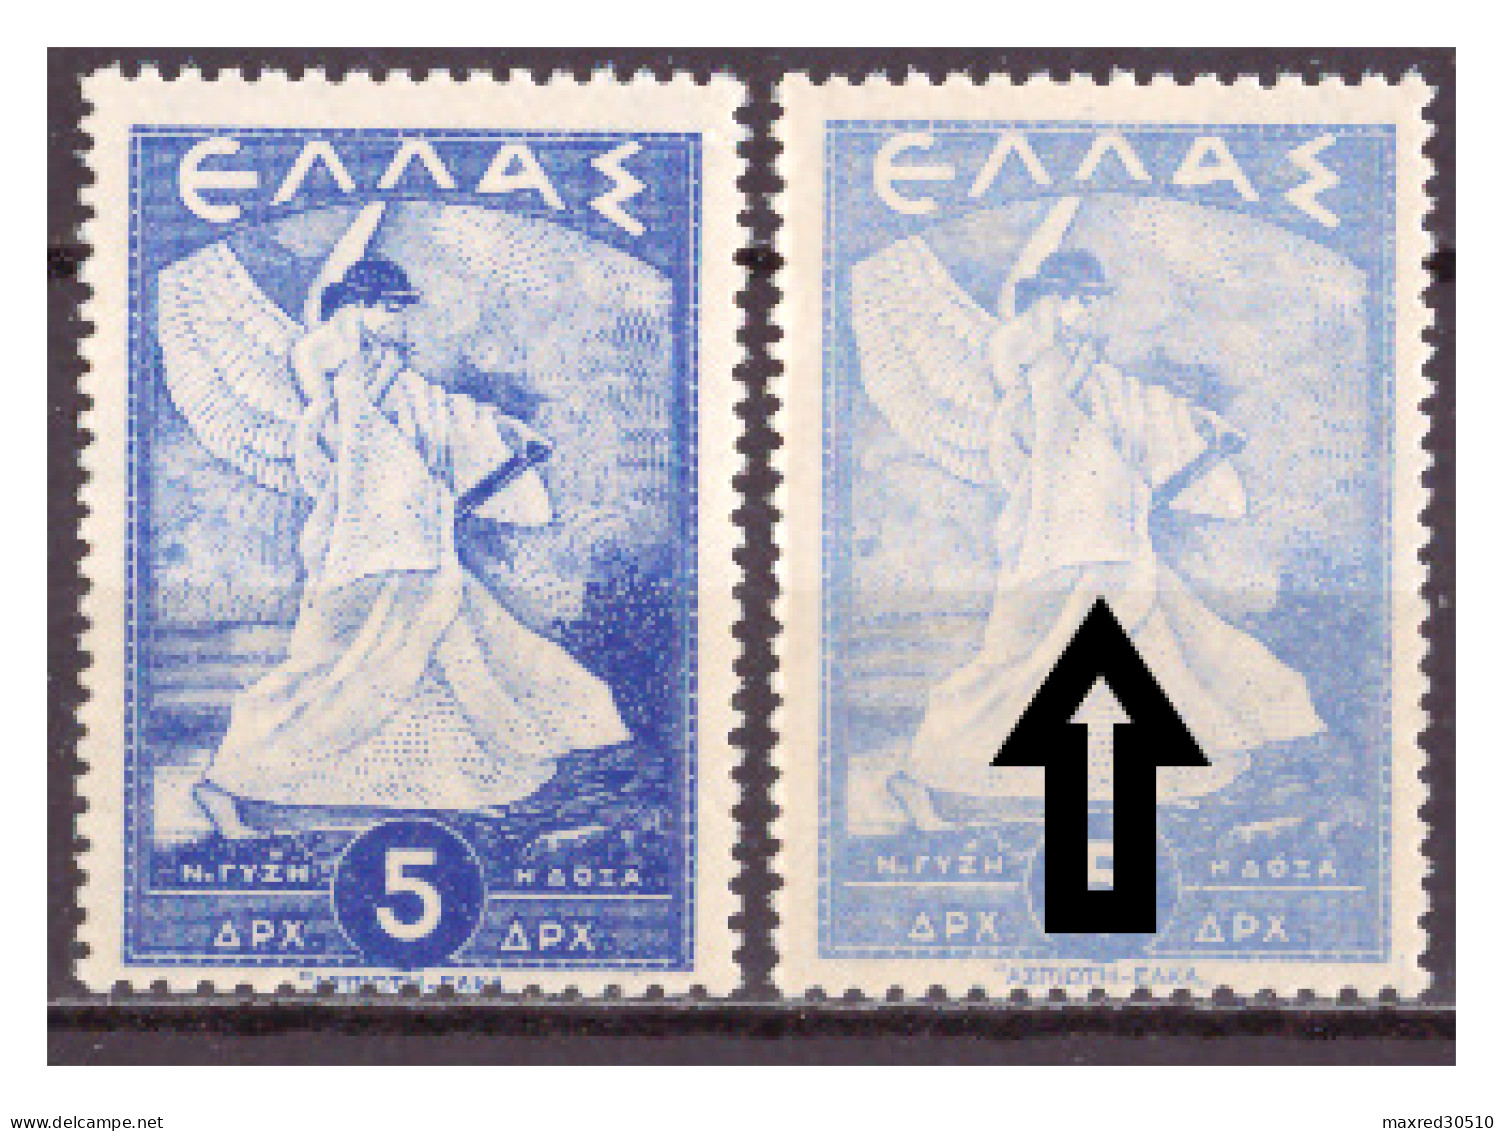 GREECE 1945 2X5L. OF THE "GLORY ISSUE" THE 2ND ONE (SEE ARROW) WITH CLEAR COLOR DIFFERENCE ERROR MNH - Abarten Und Kuriositäten